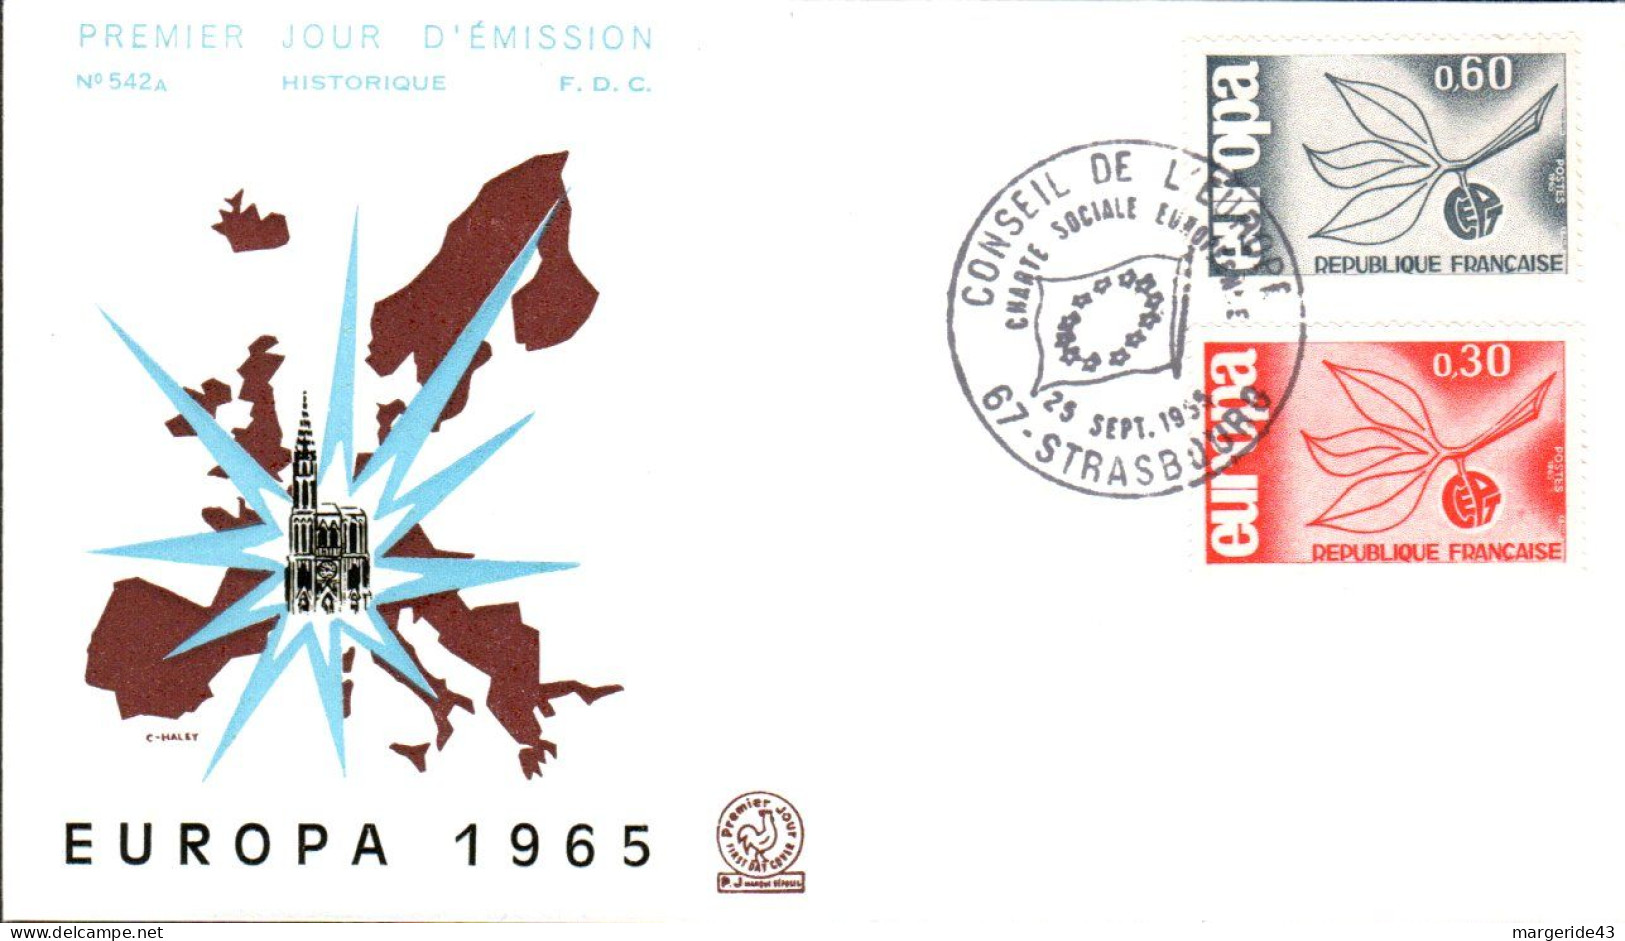 EUROPA 1965 FRANCE FDC - 1965